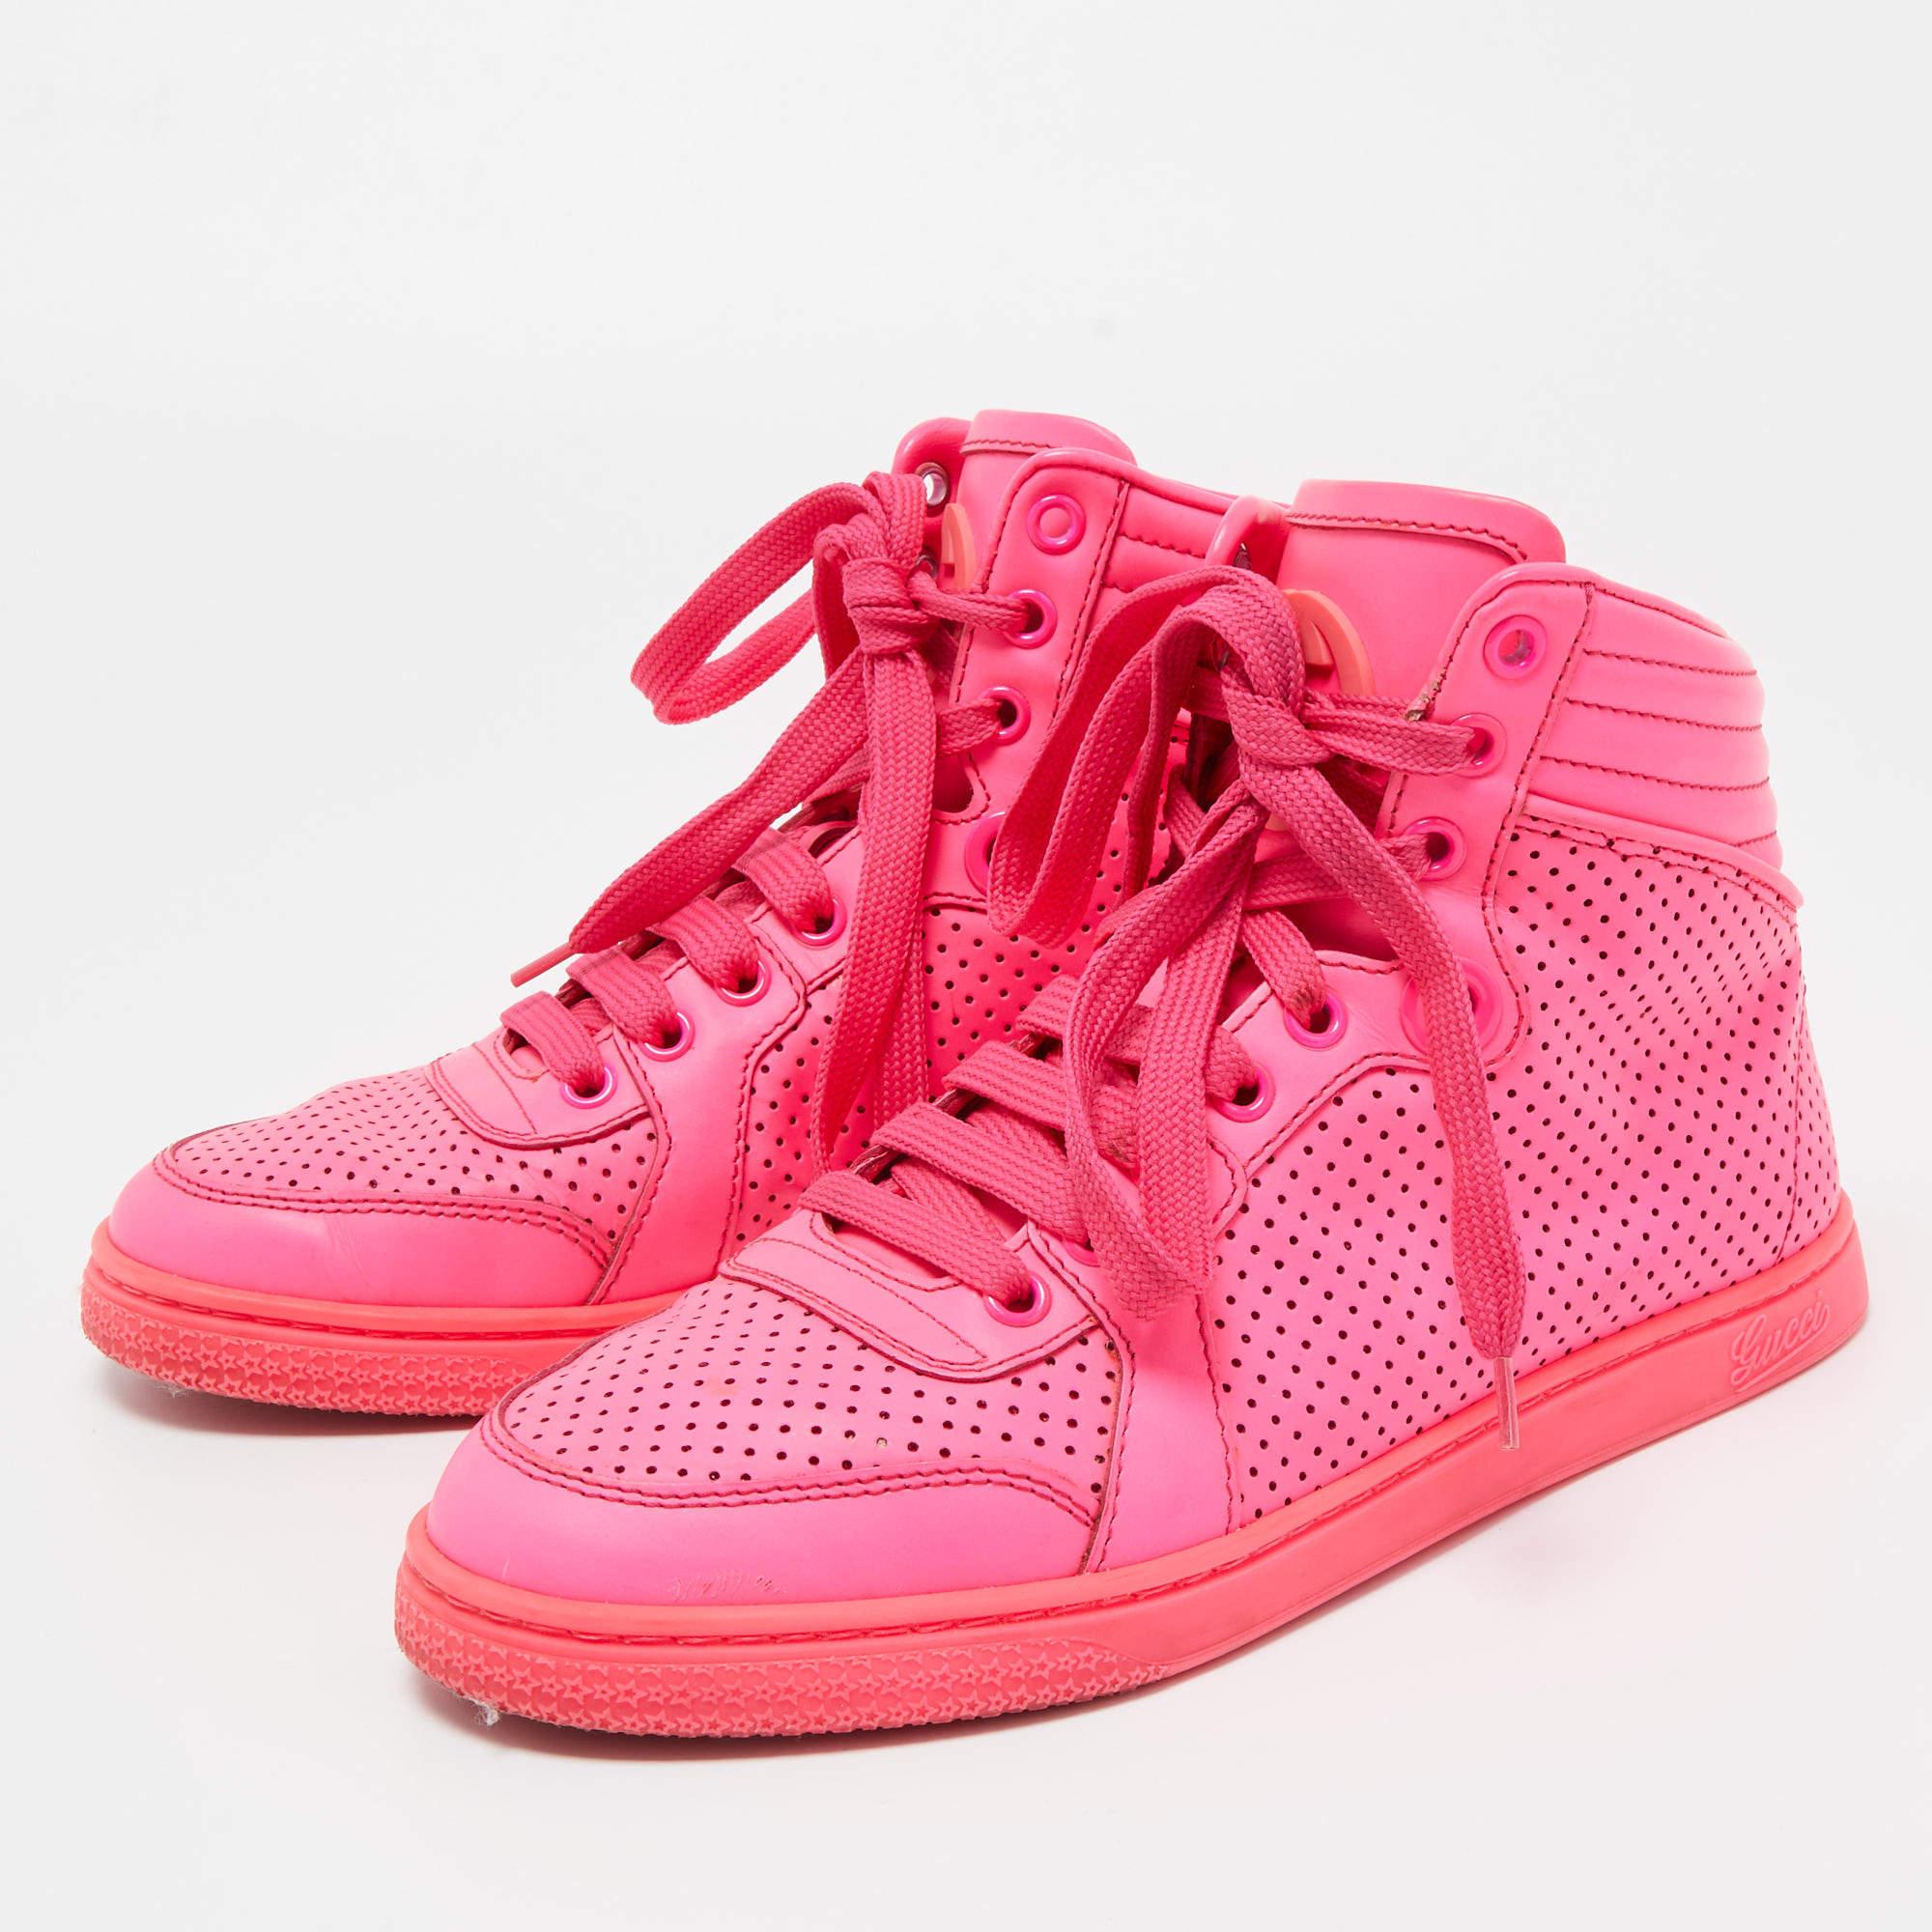 Give your outfit a luxe update with this pair of Gucci neon pink sneakers. The shoes are sewn perfectly to help you make a statement in them for a long time.

